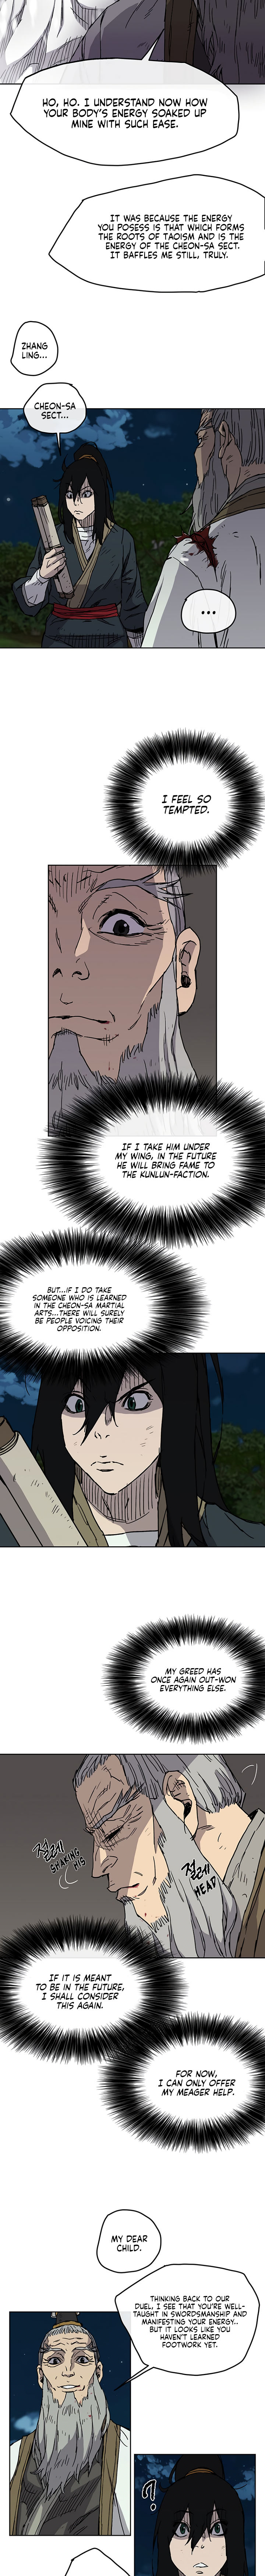 The Undefeatable Swordsman - Chapter 7 Page 6